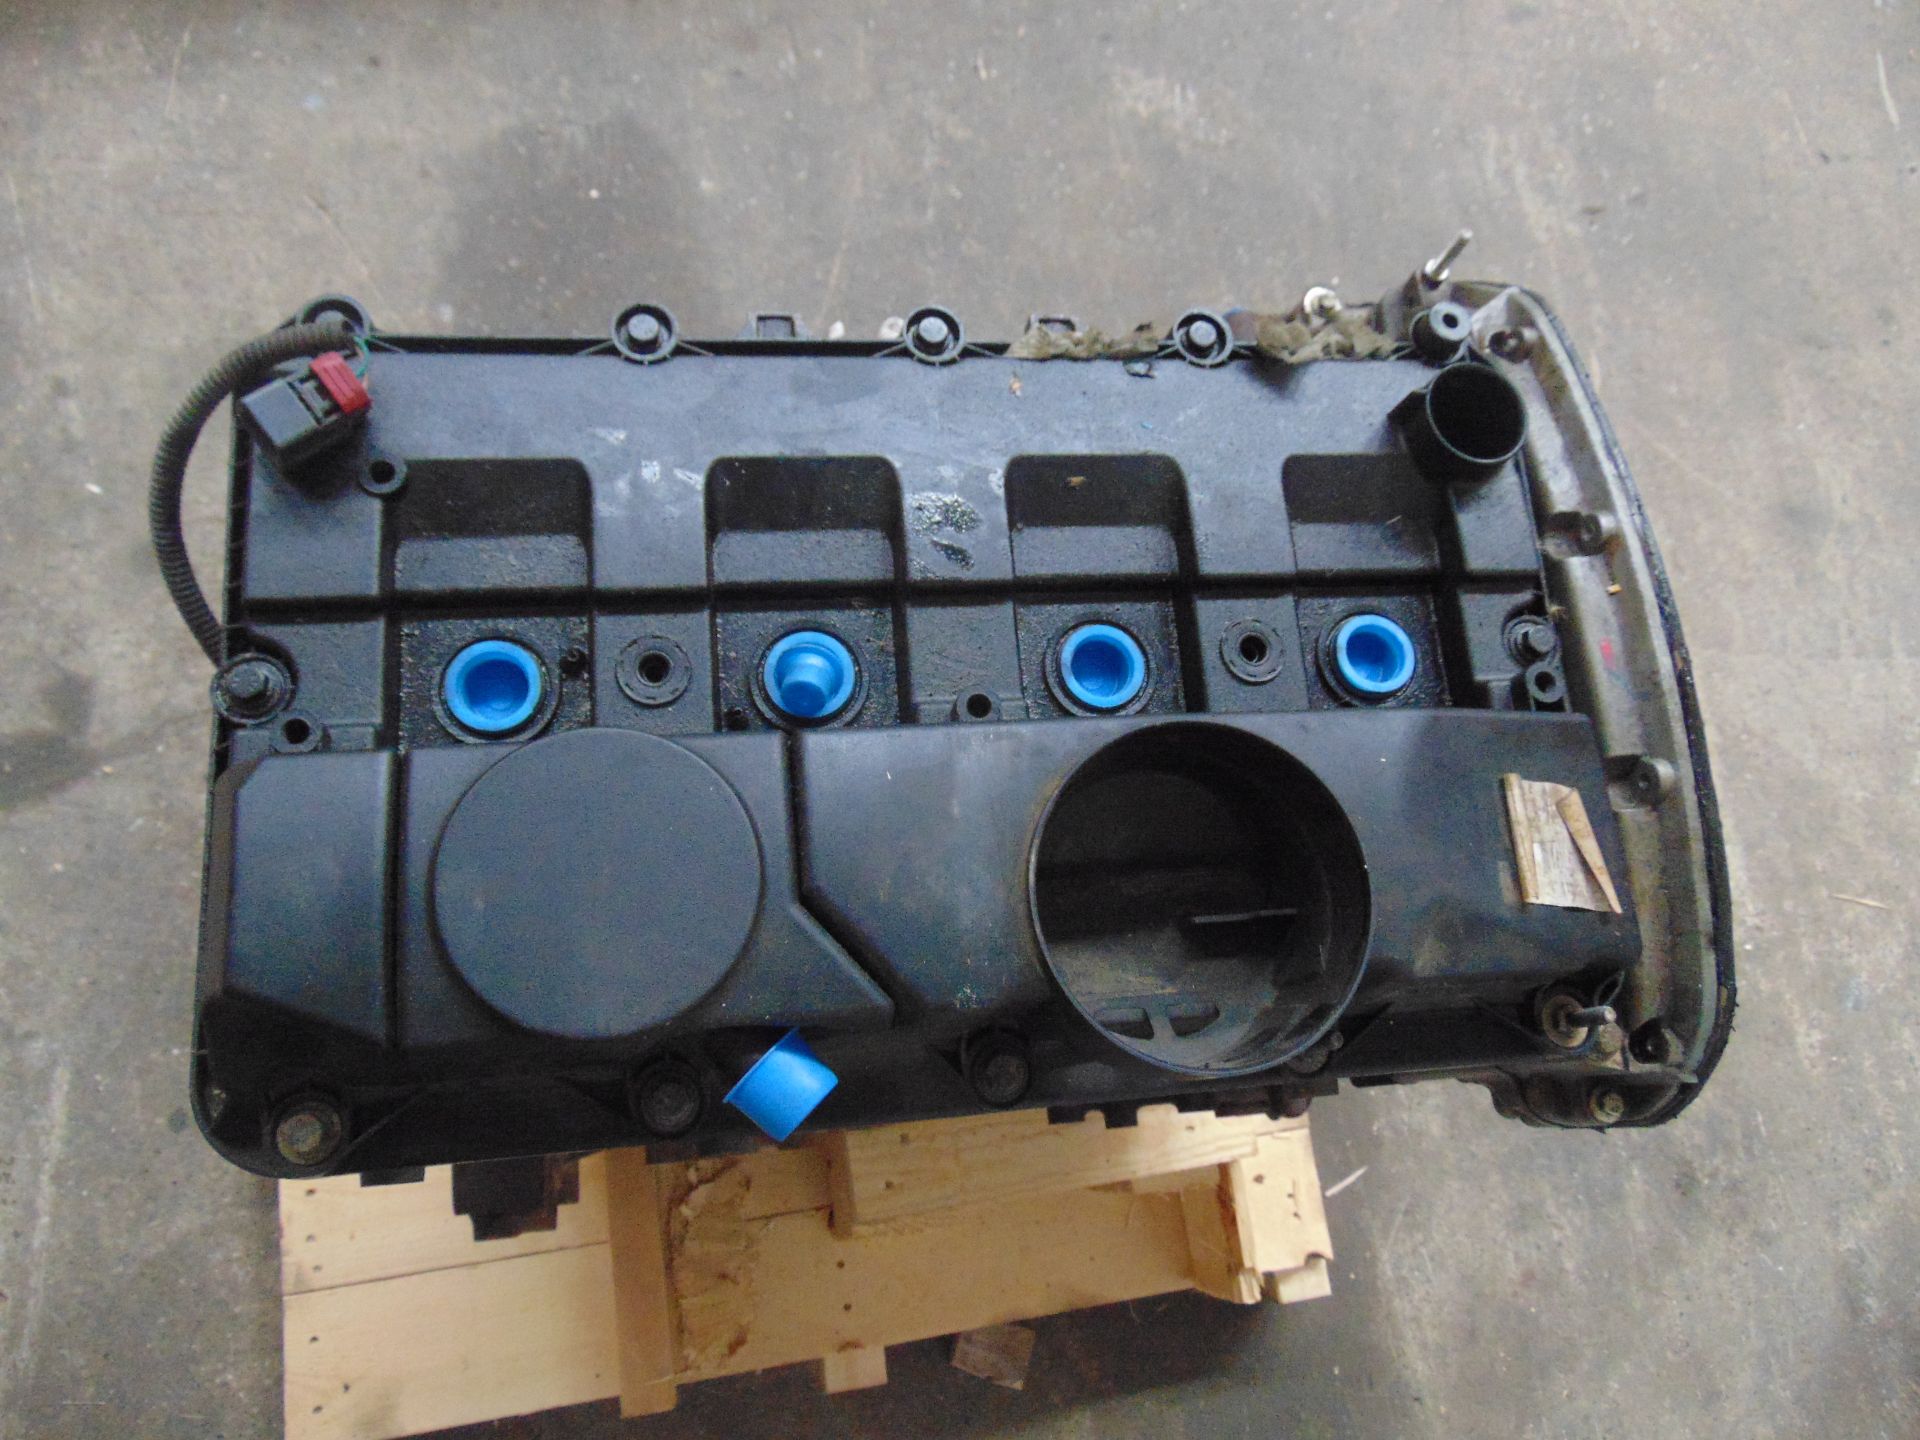 Land Rover 2.4L Ford Puma Takeout Diesel Engine P/No LR016810 - Image 9 of 10